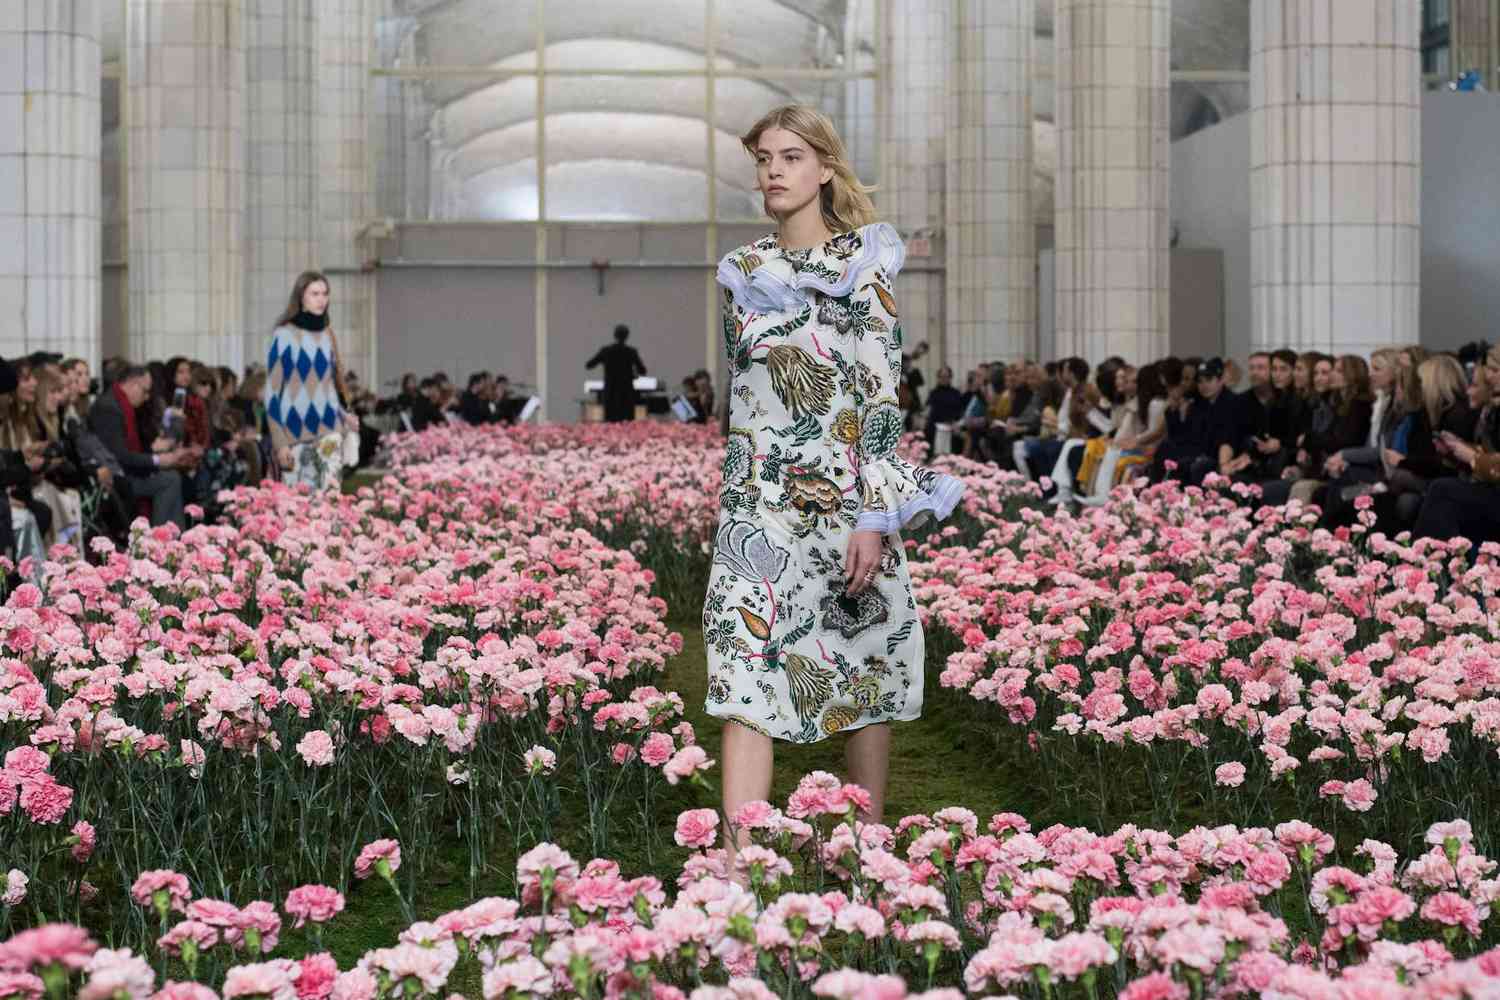 Tory Burch Carnations at runway show